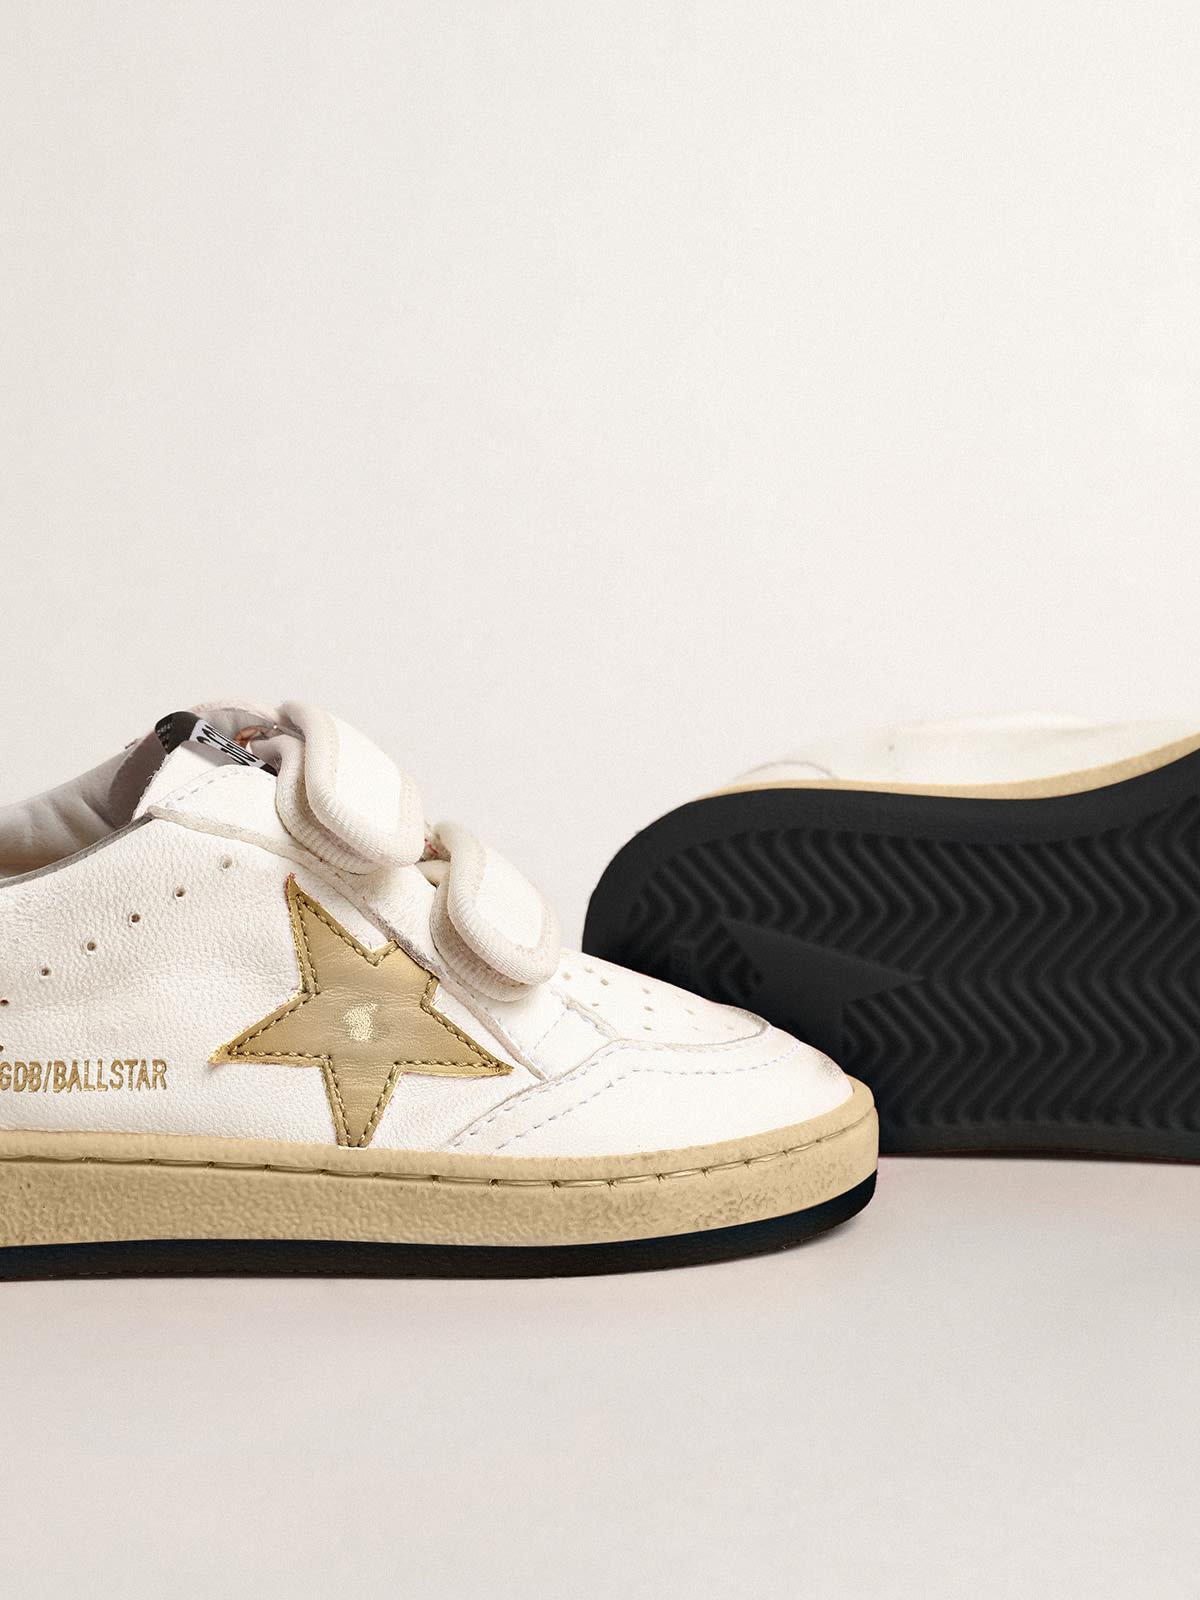 Golden Goose - Ball Star Young with gold metallic leather star and heel tab in 